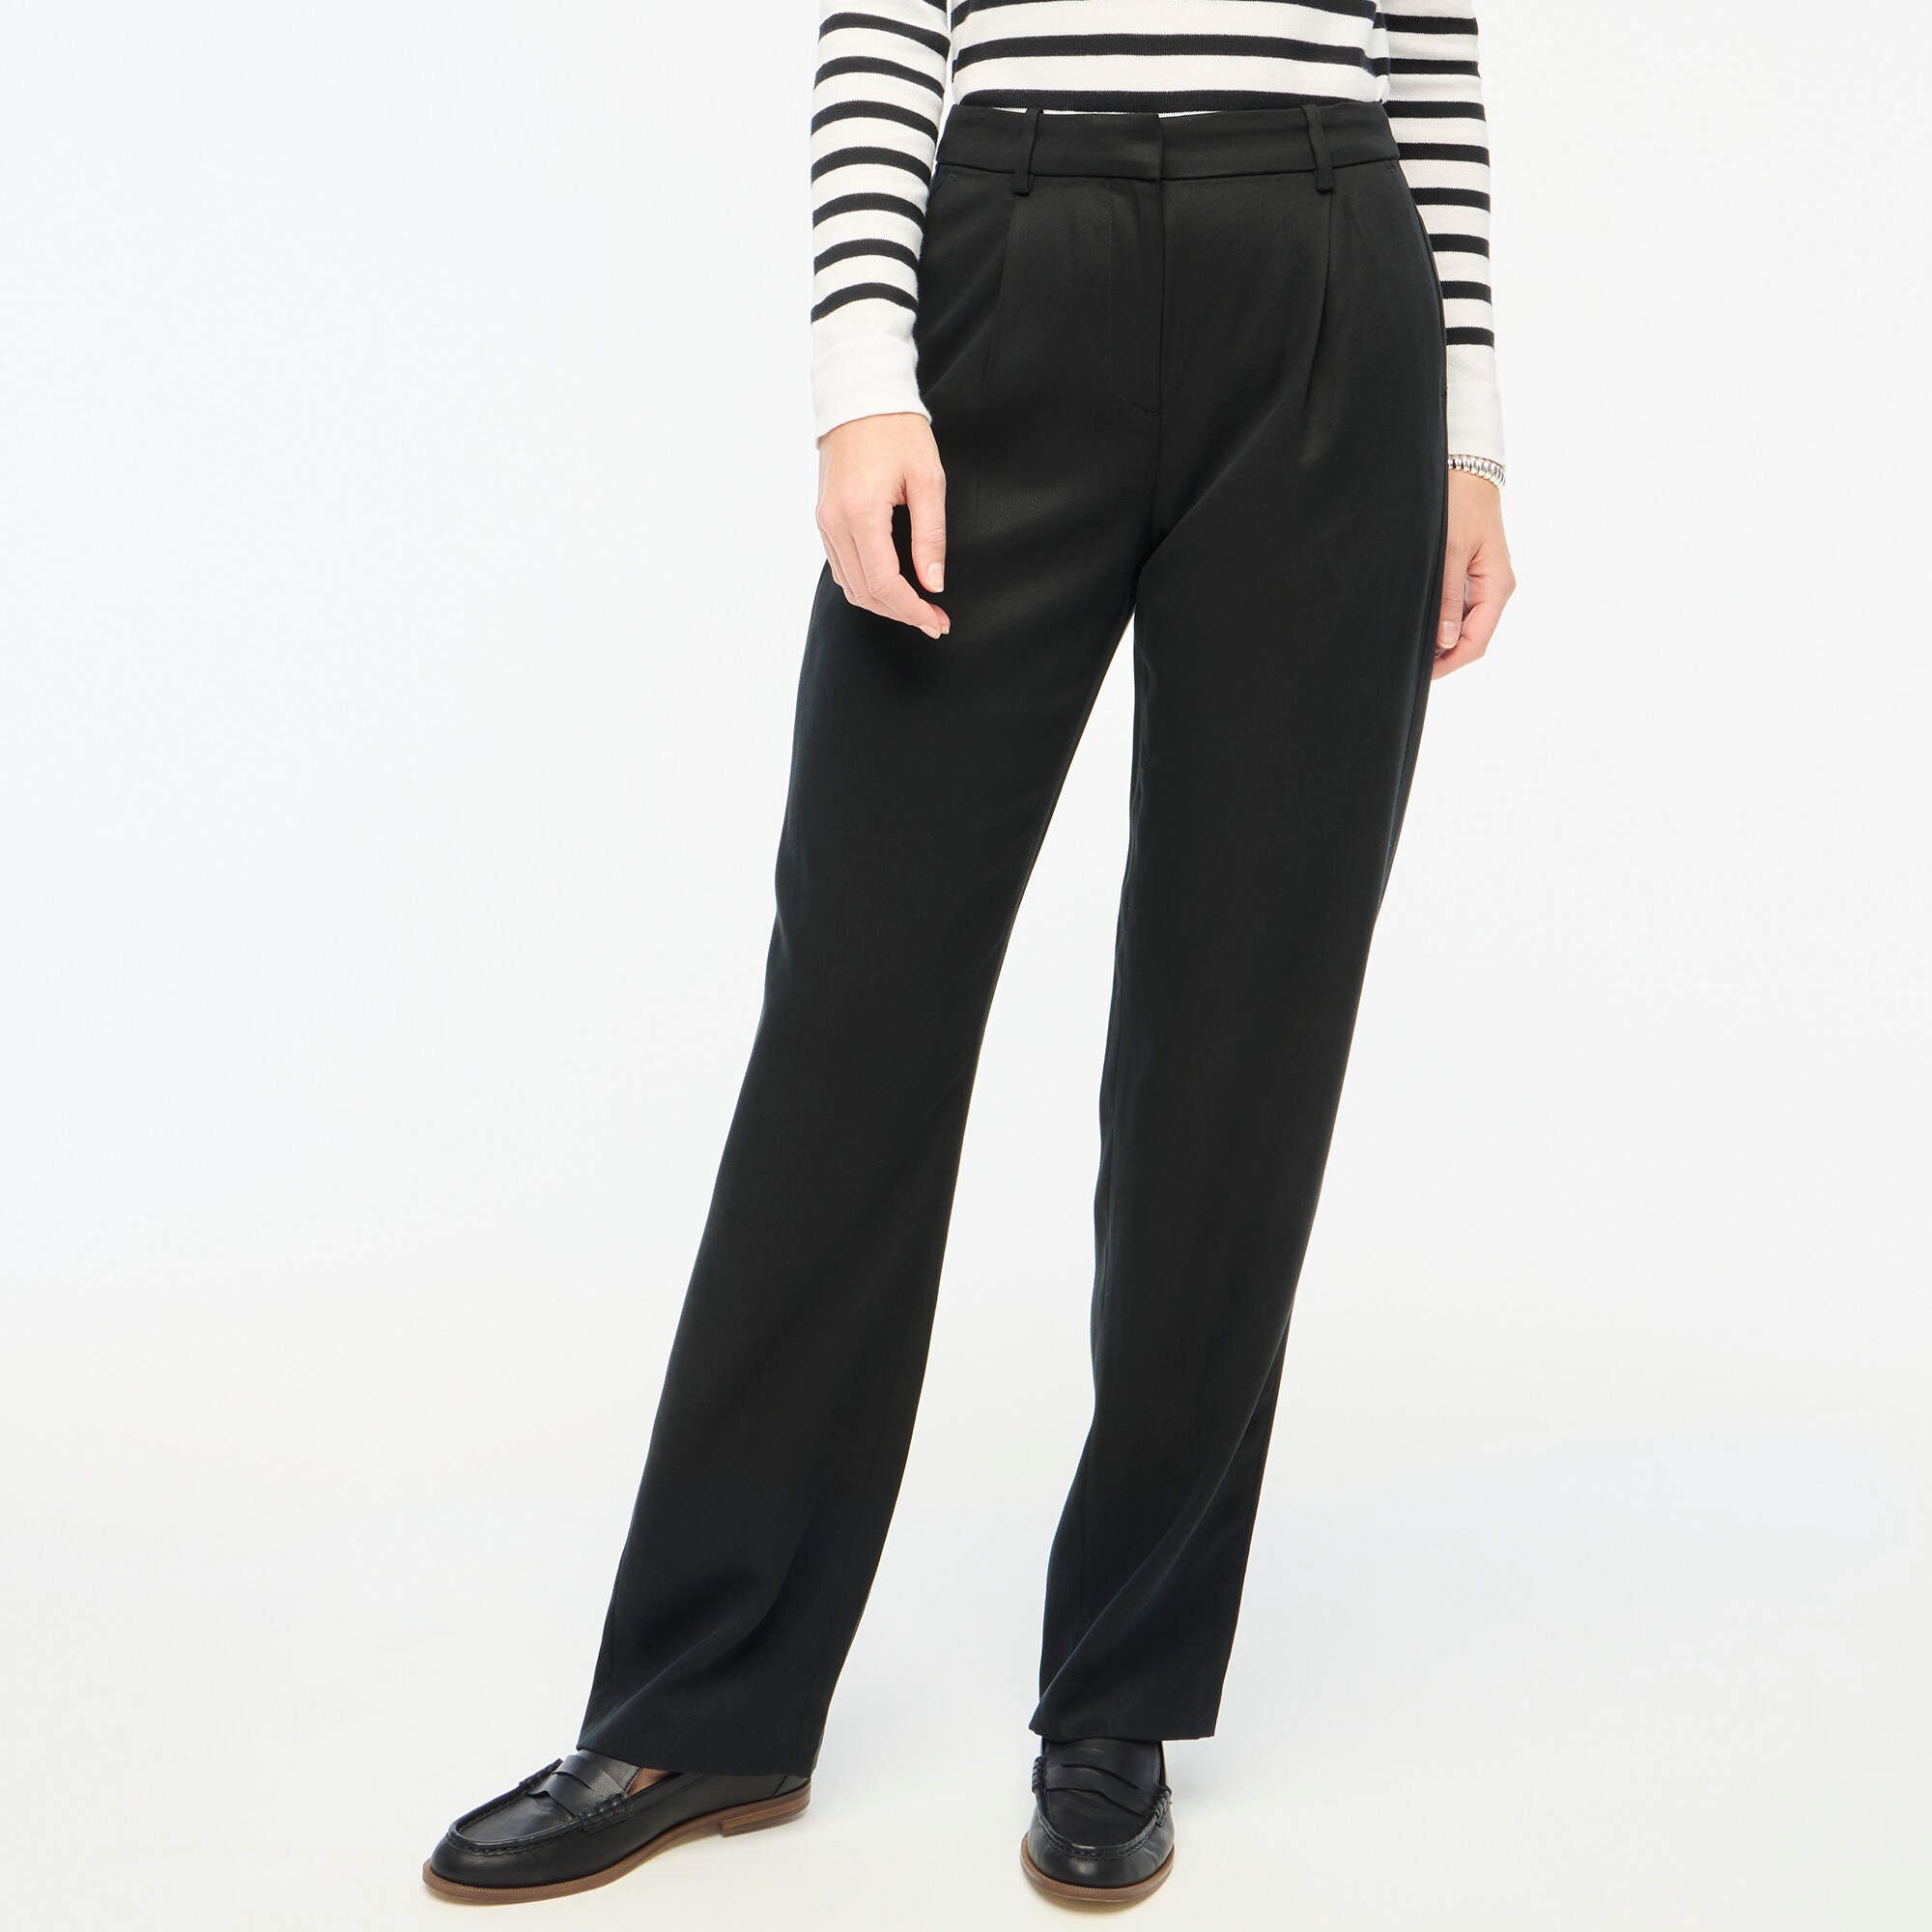  Tall wide-leg pleated twill trouser pant